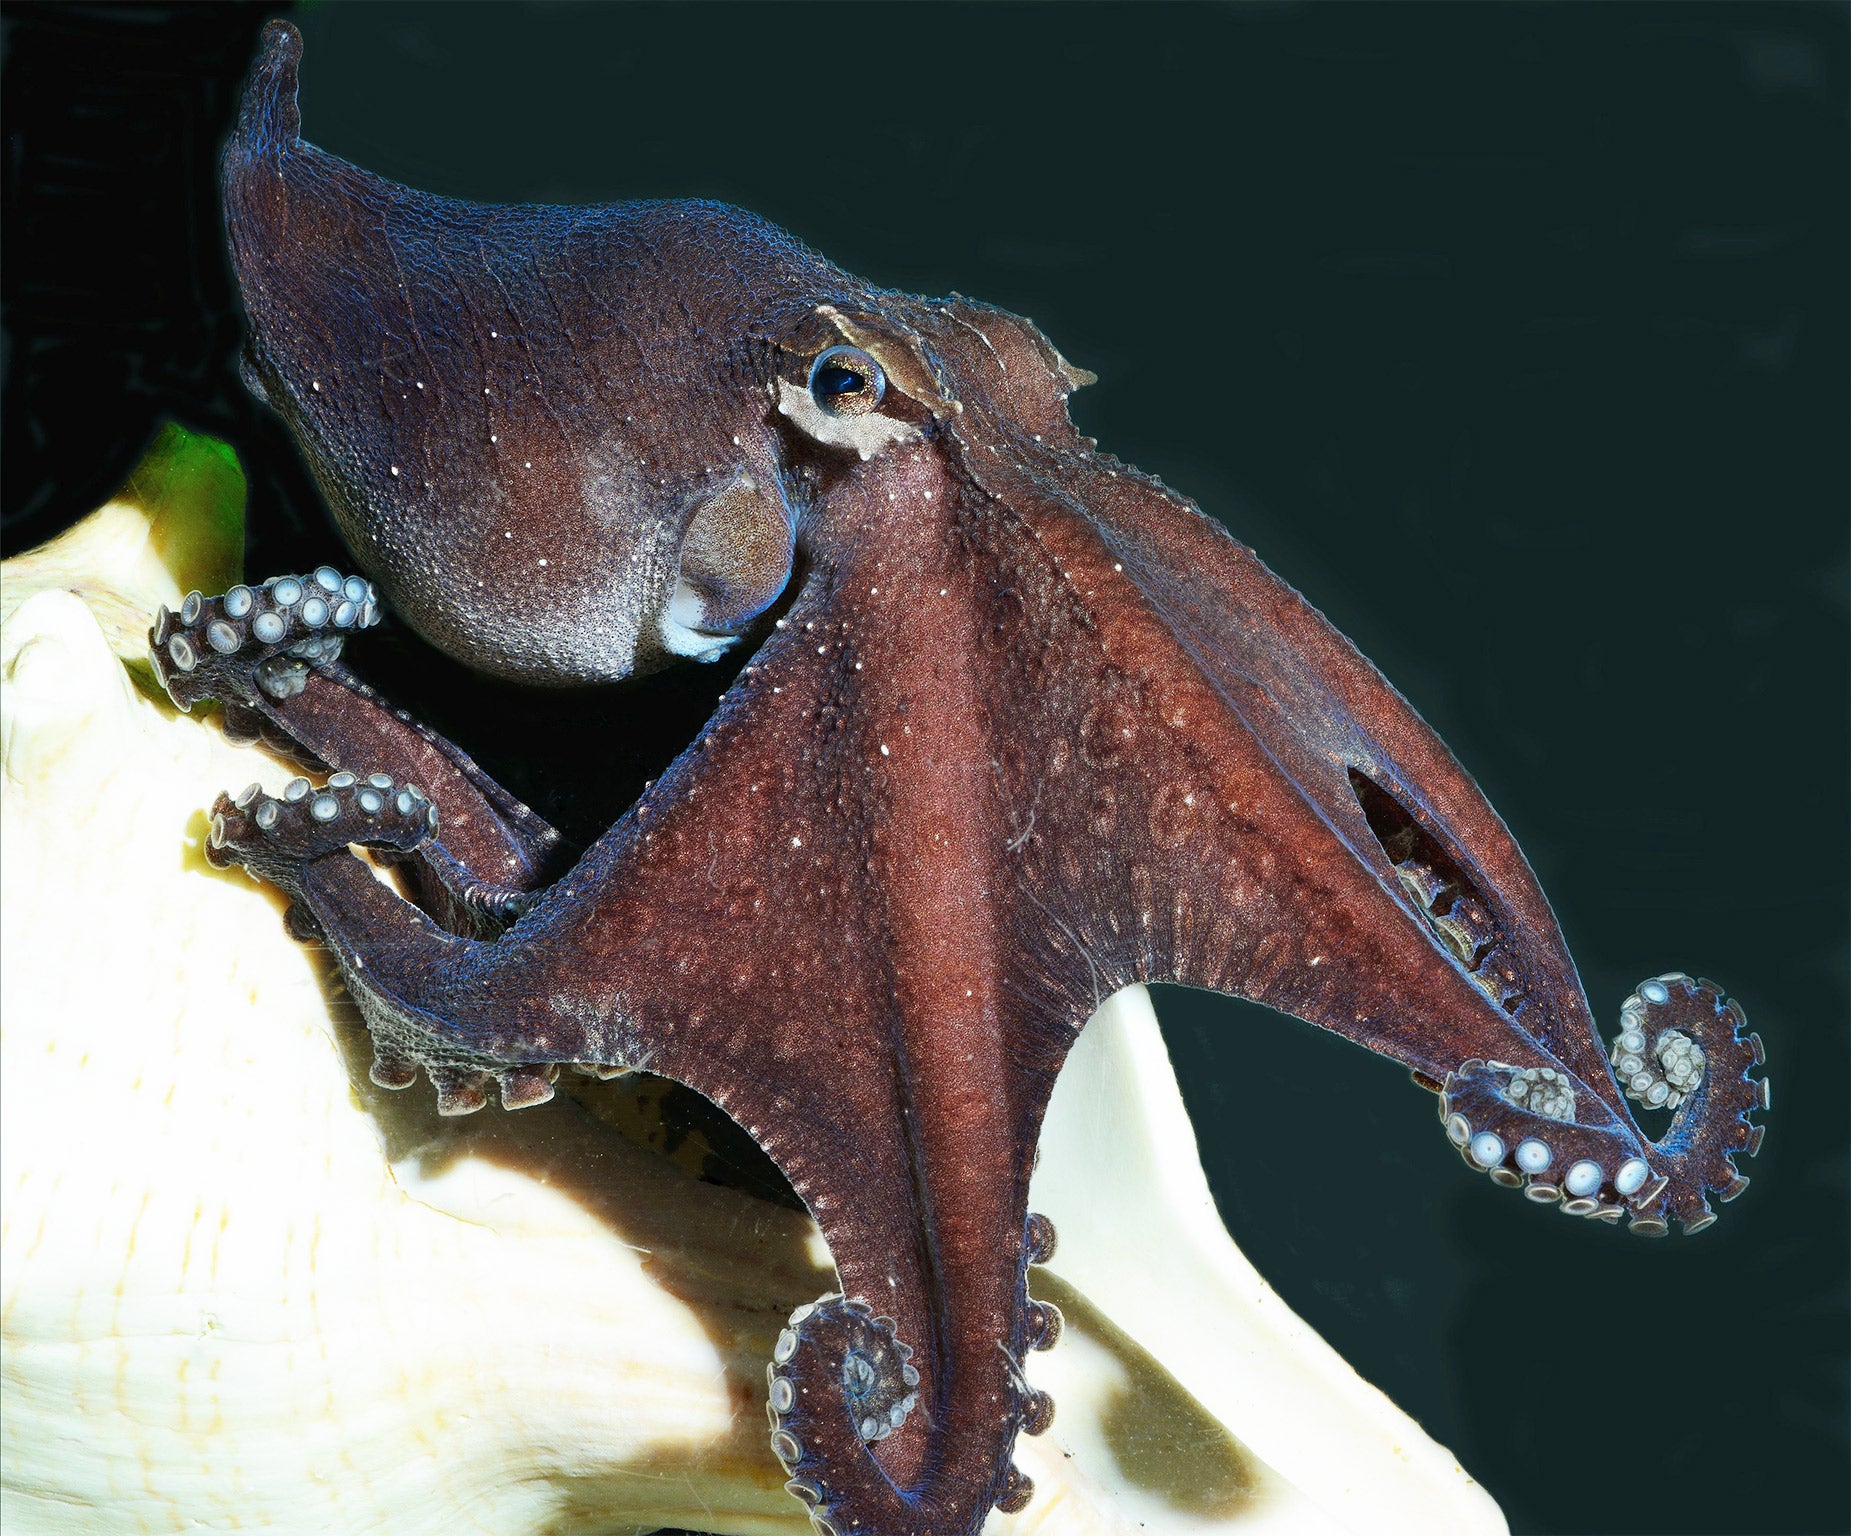 The Pacific striped octopus taps its prey to startle it, rather than pouncing